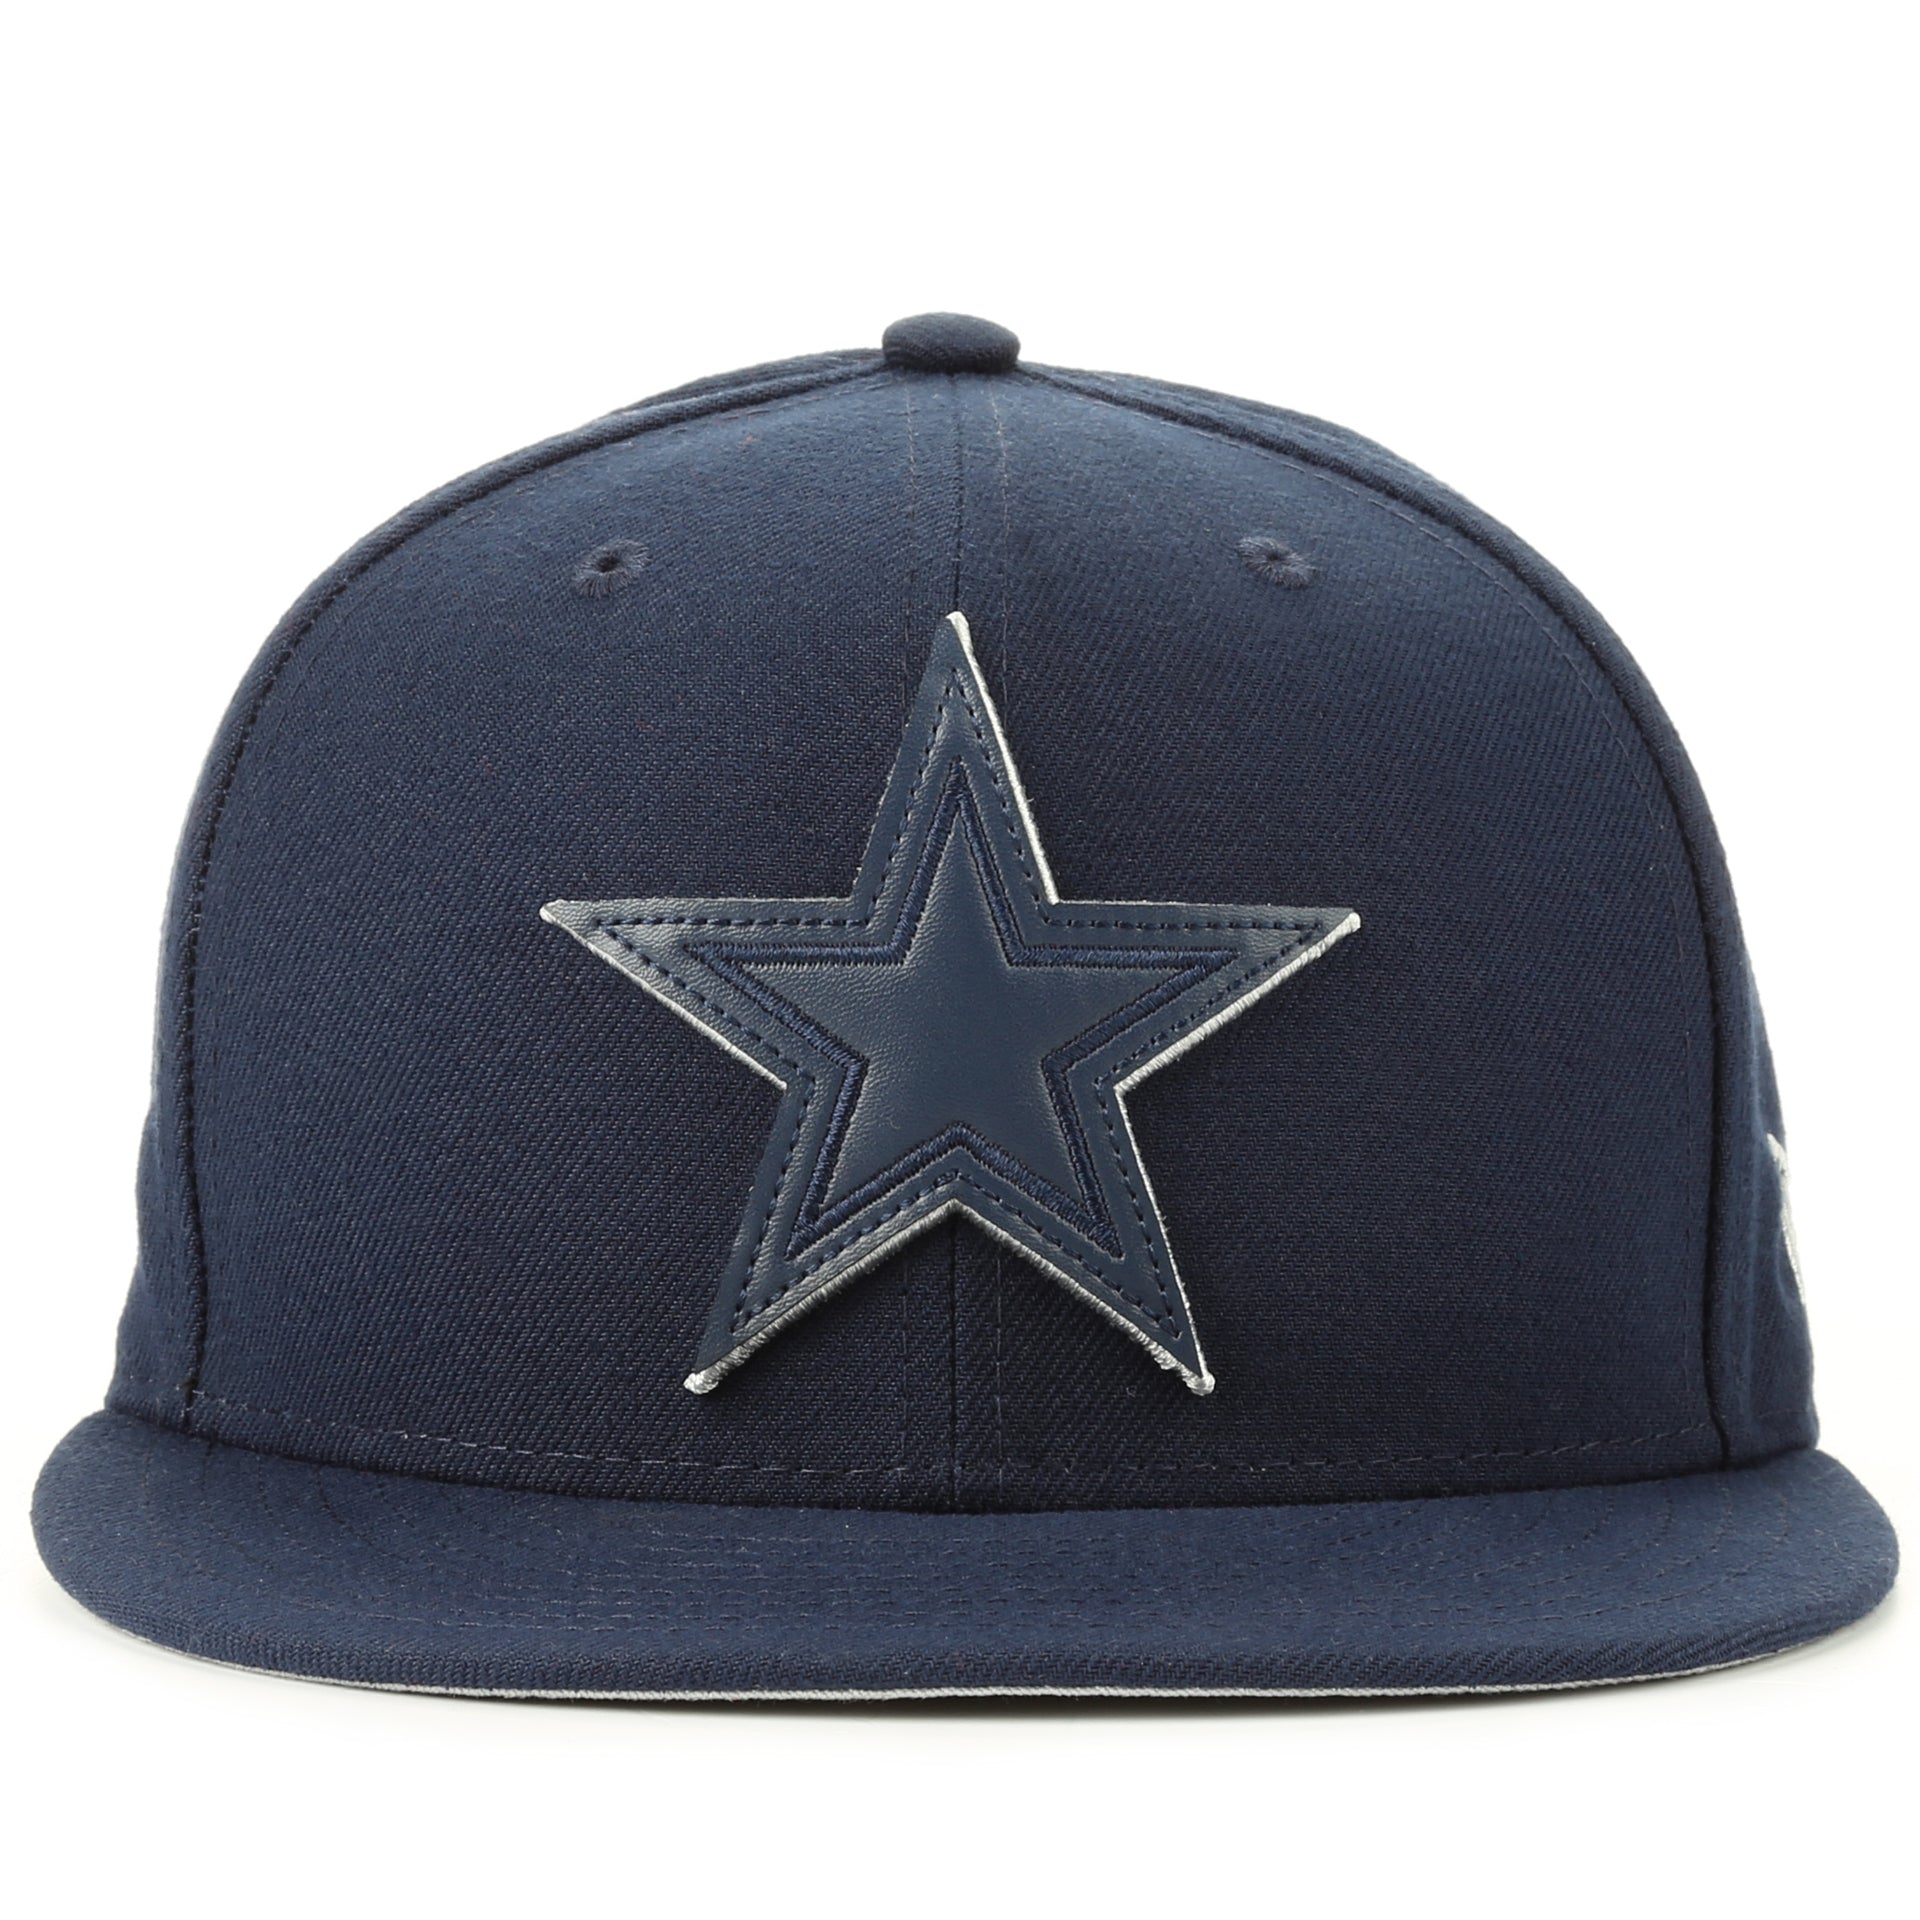 New Era 59Fifty Leather Pop Fitted Cap - Dallas Cowboys/Navy - New